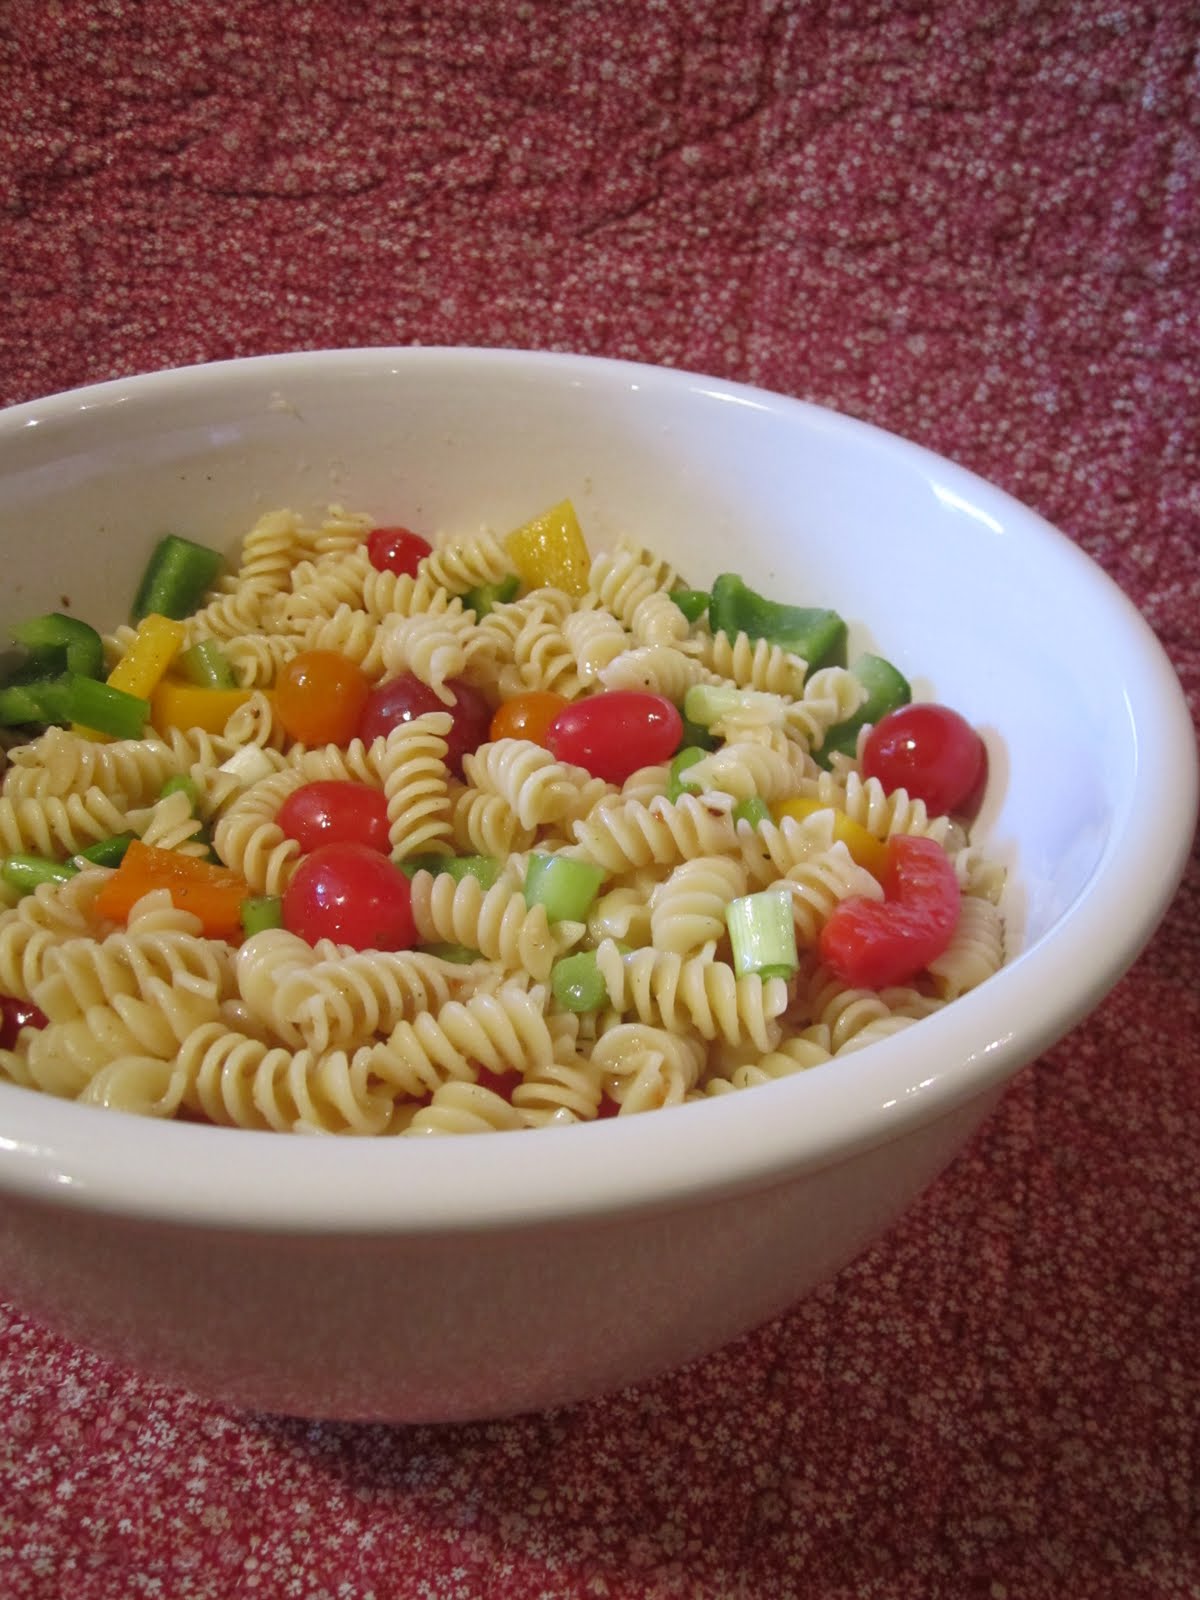 Wendys Hat: How to Make a Cold Pasta Salad {Recipe}